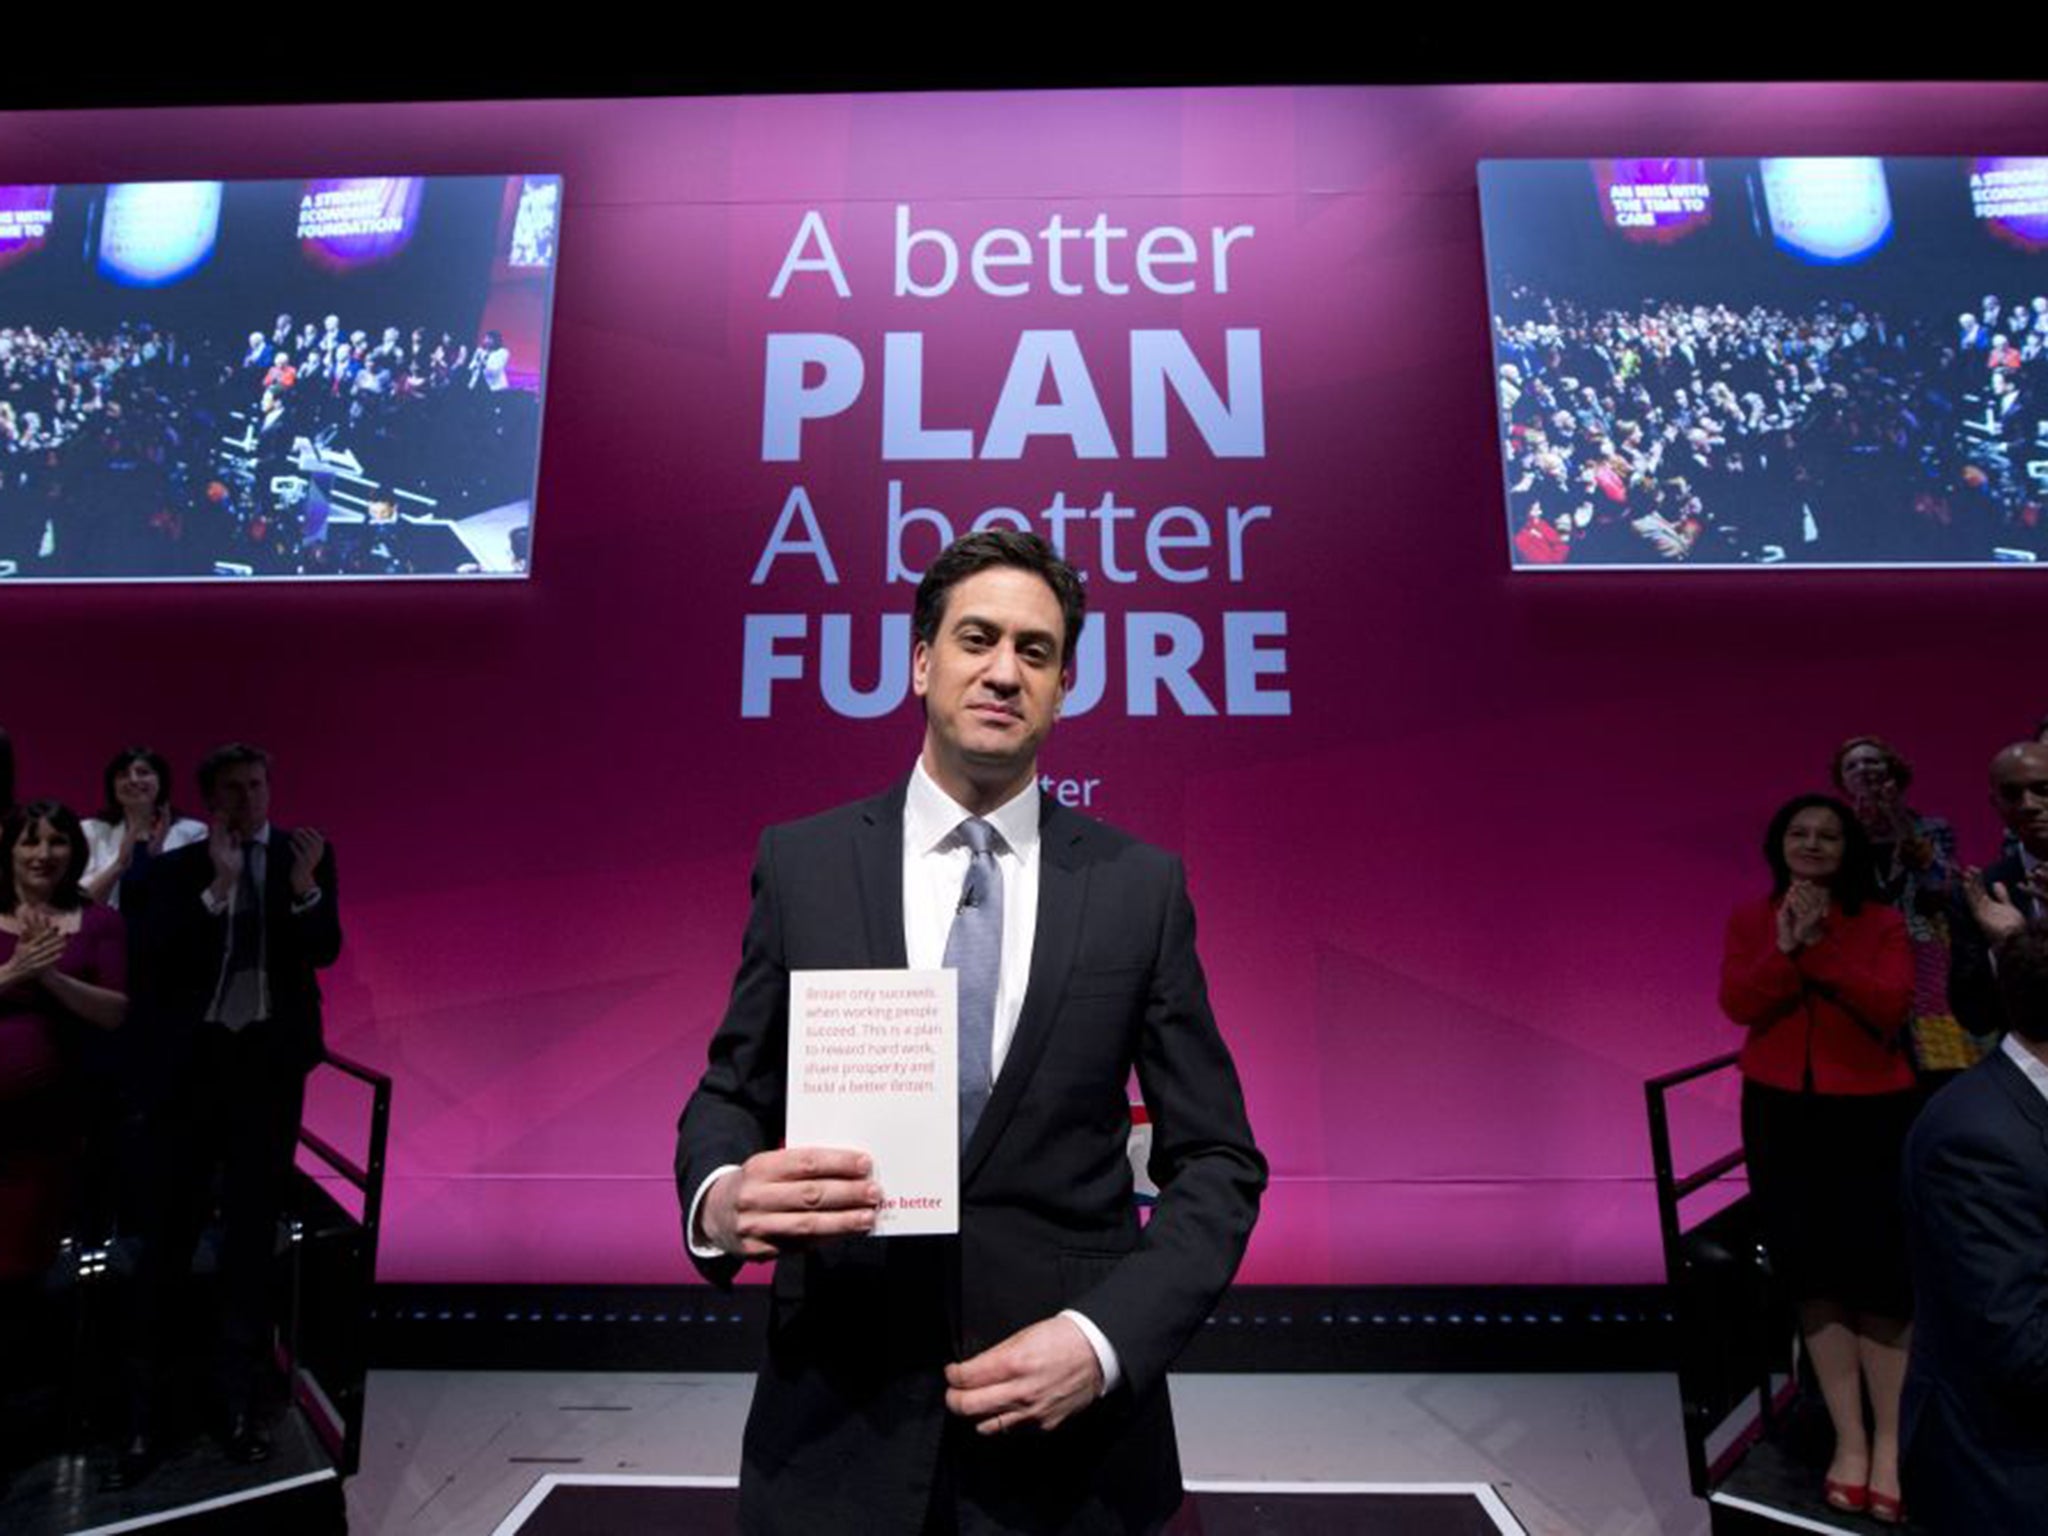 It’s all in the detail; Ed Miliband with ‘Britain Can Be Better’ (AFP/Getty)